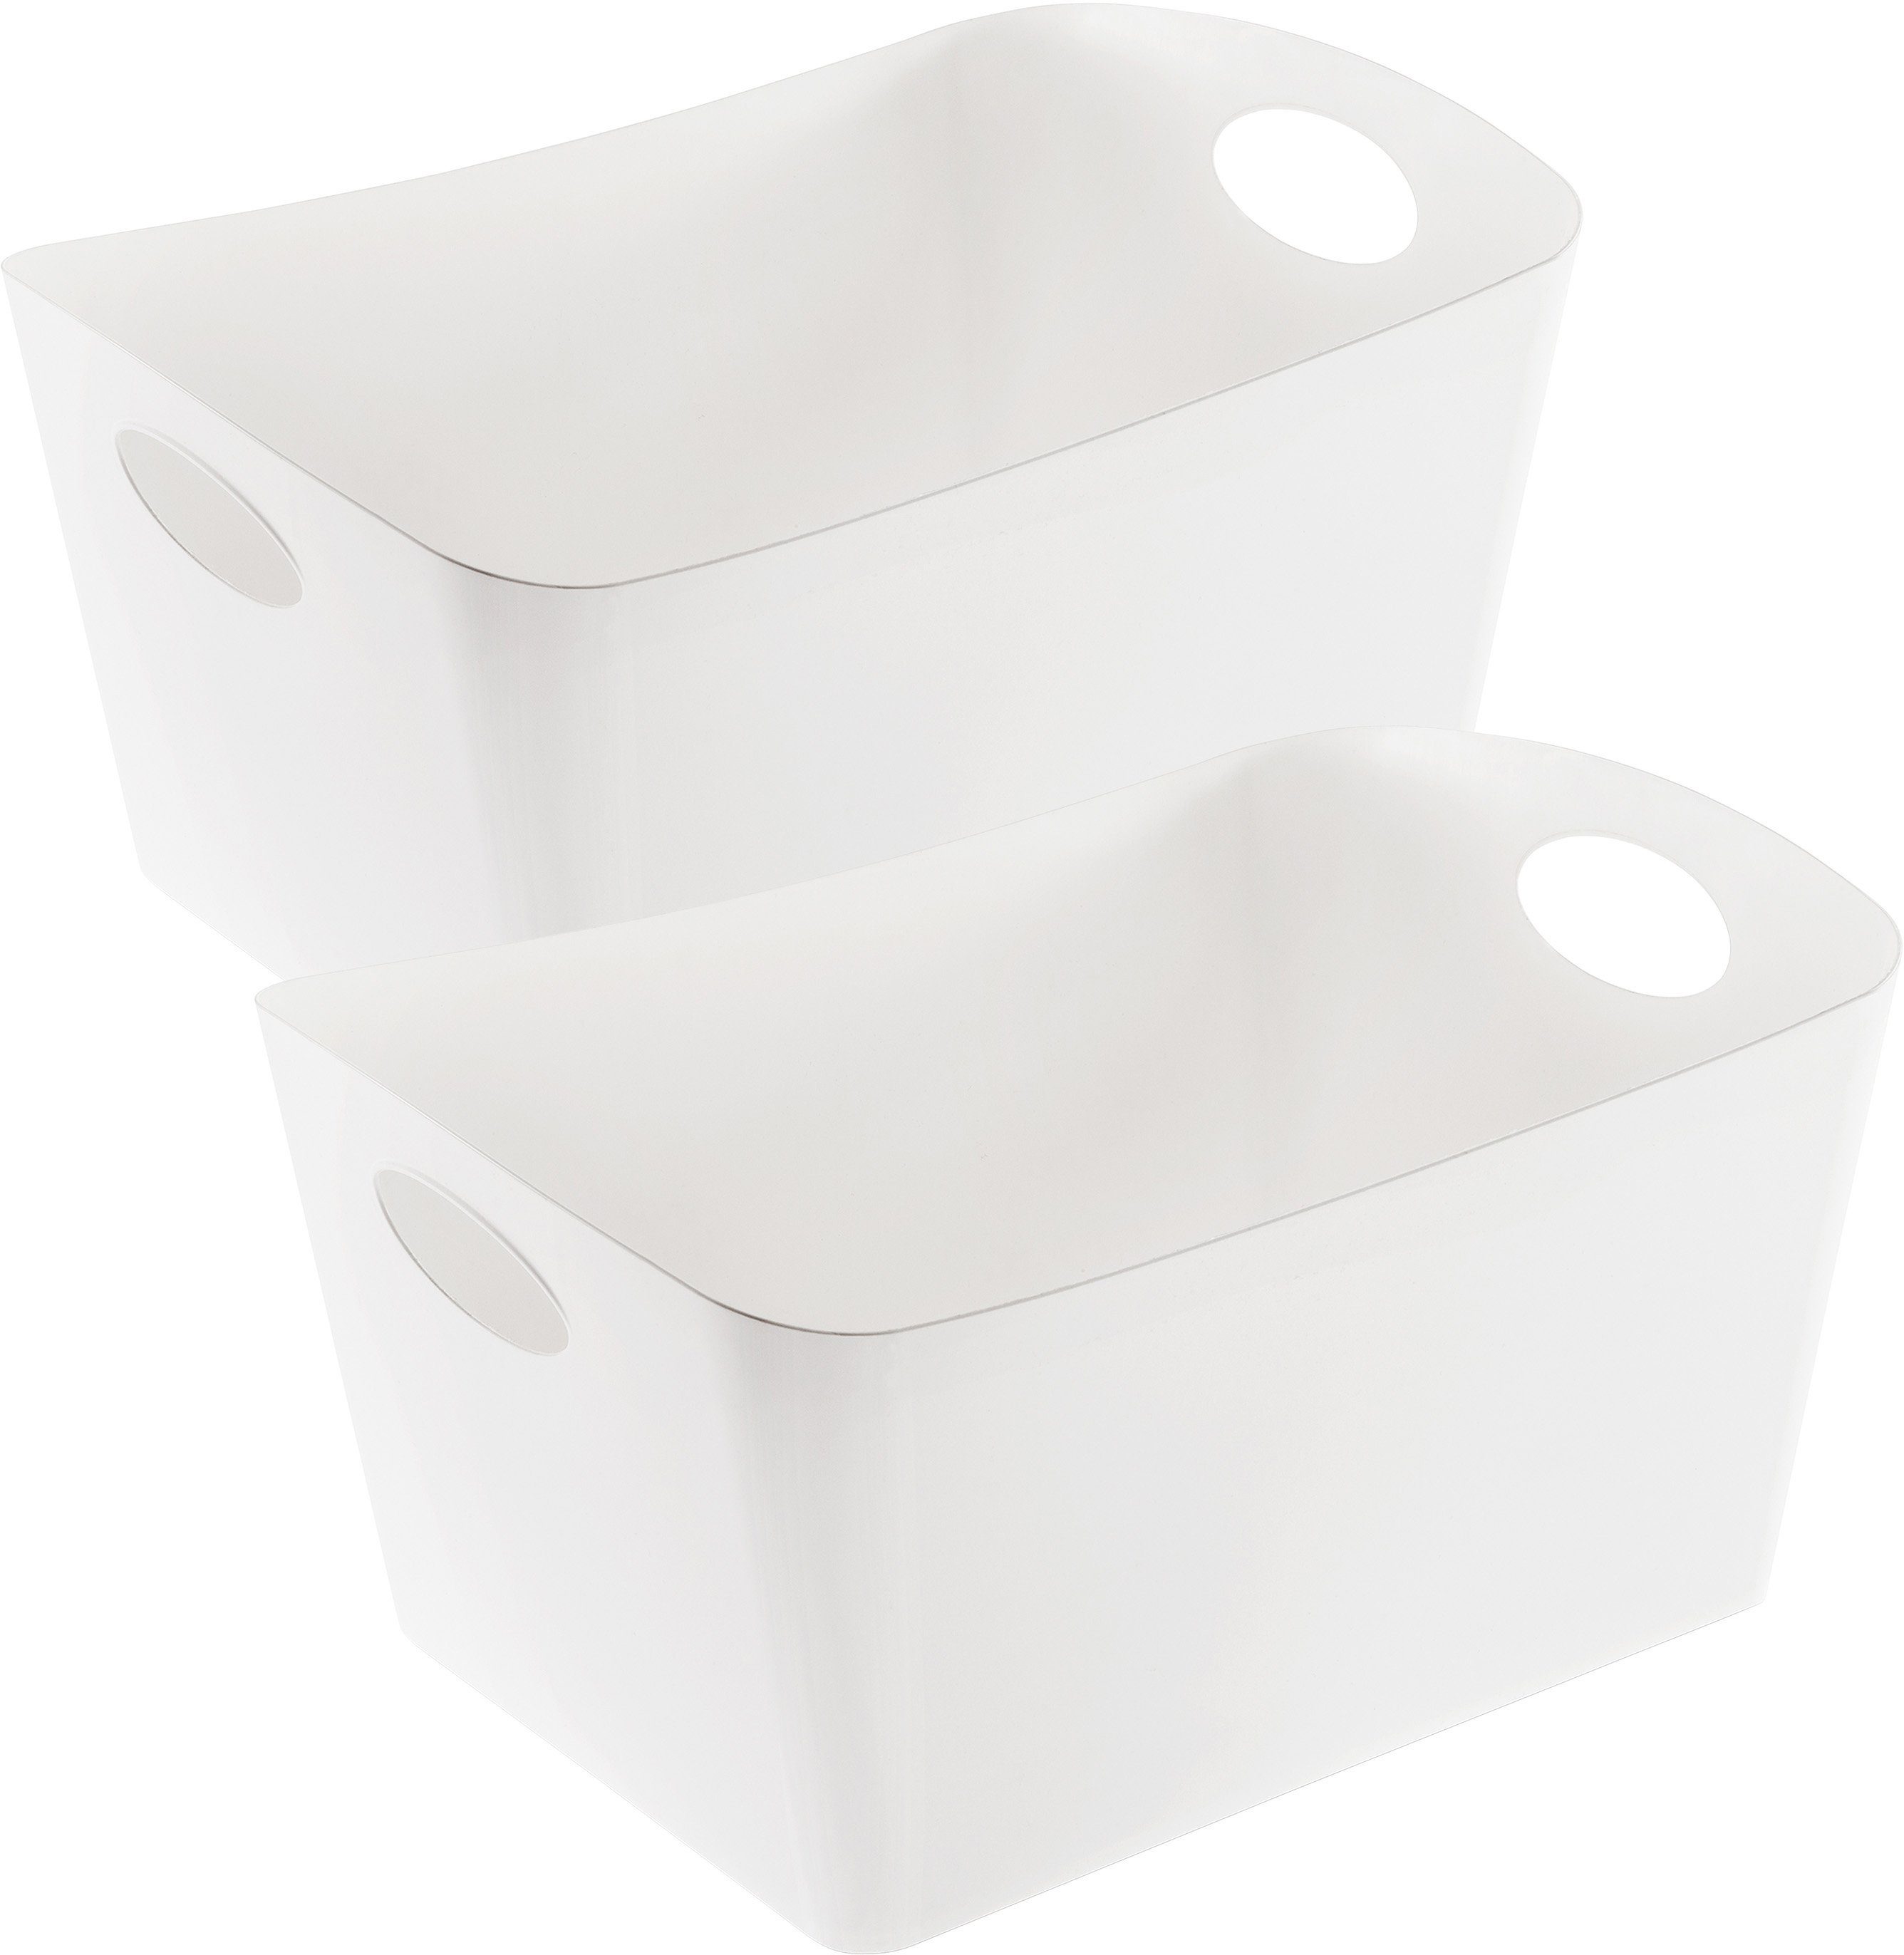 KOZIOL Organizer BOXXX L (Set, 2 St), Aufbewahrungsbox, Made in Germany, 100% recyceltes Material, 15 Liter recycled white